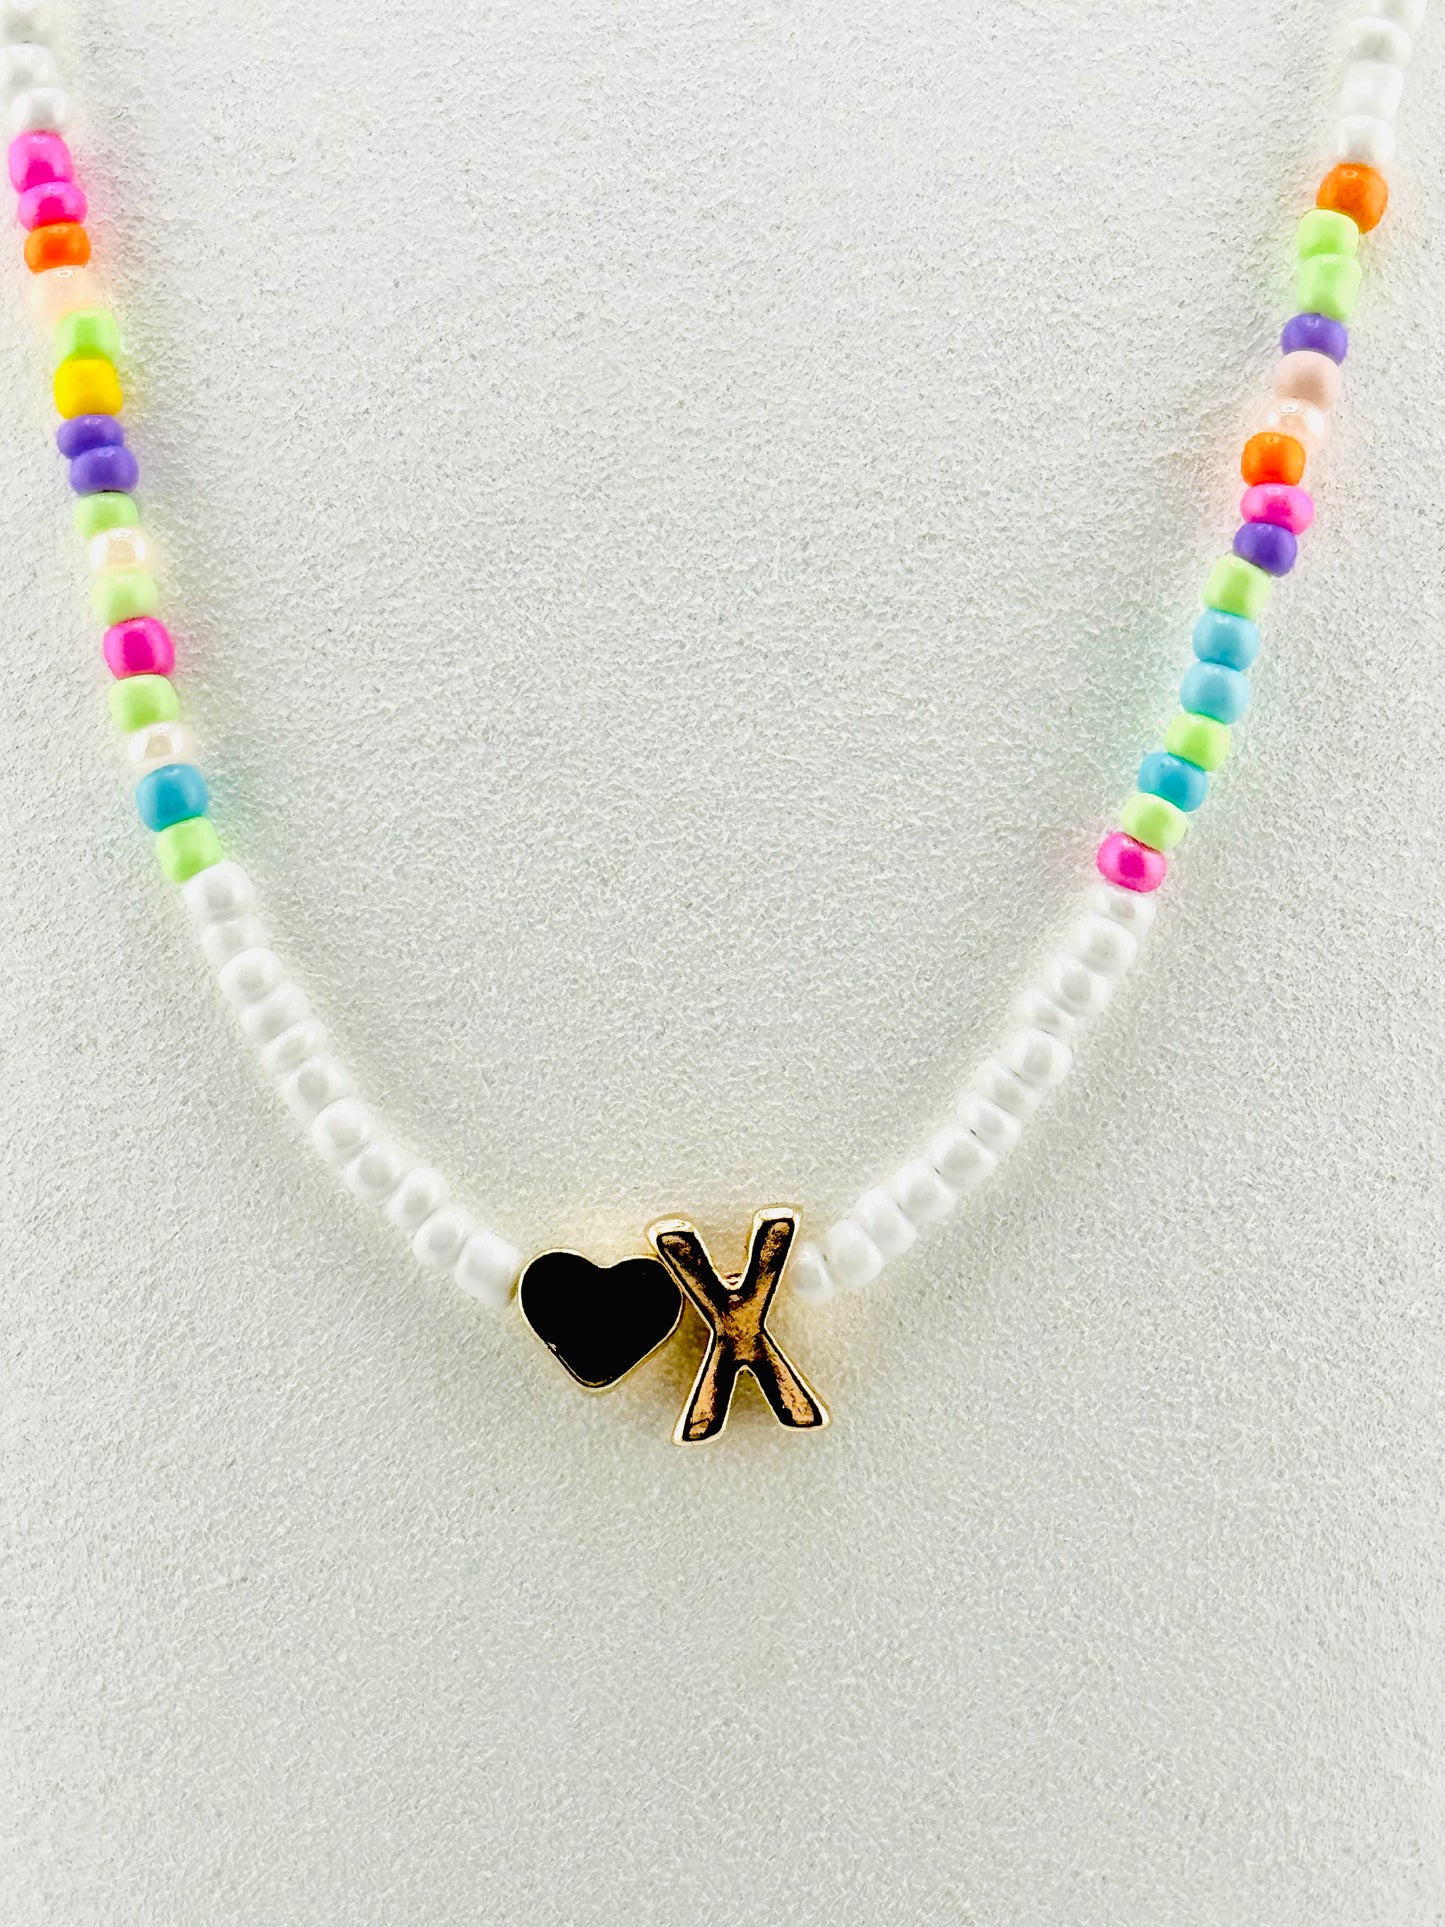 X beaded Initial necklace in white and pastel colors